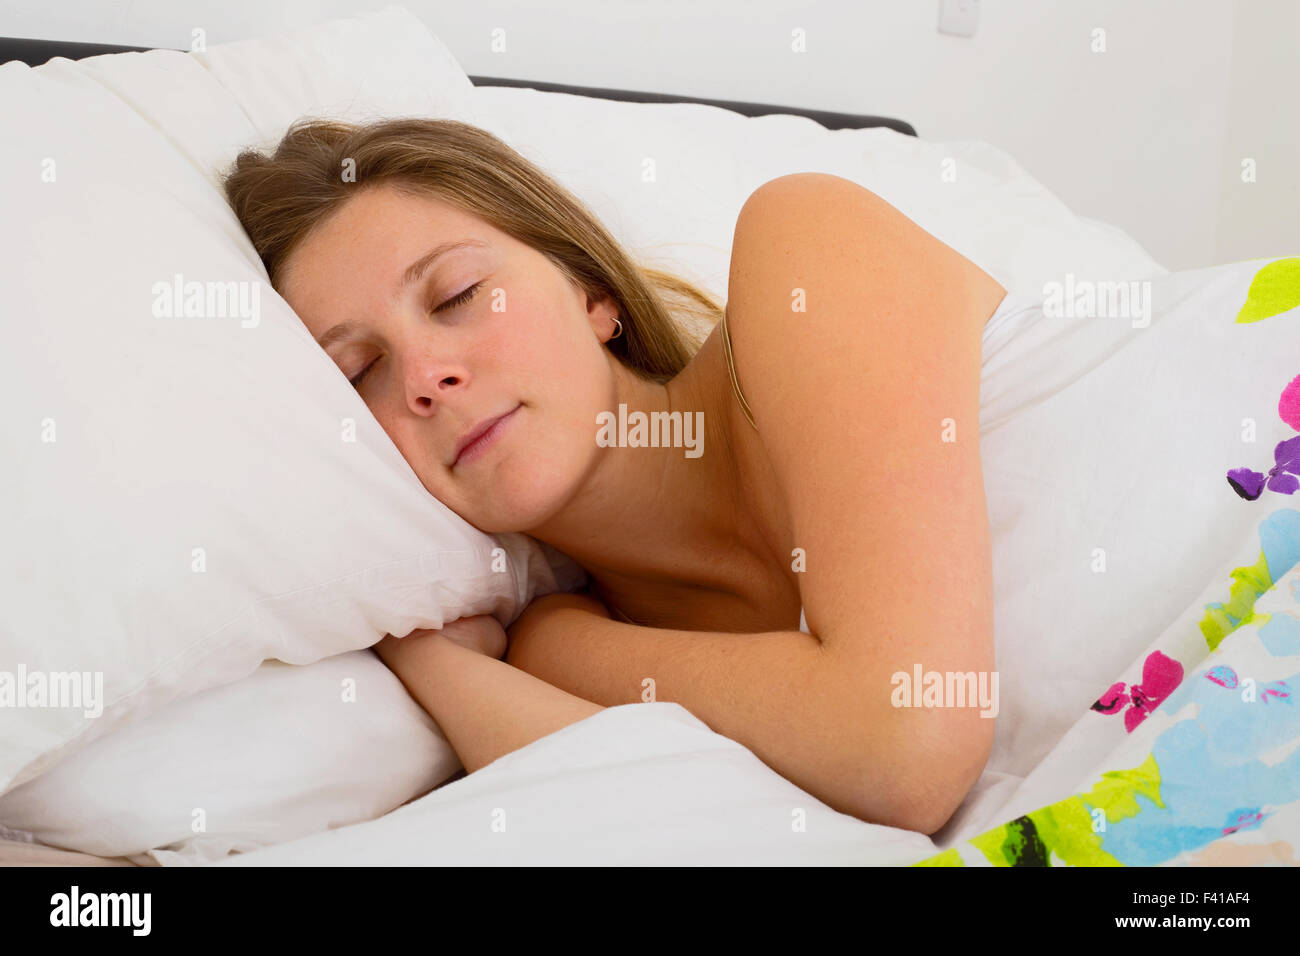 young woman asleep in bed Stock Photo